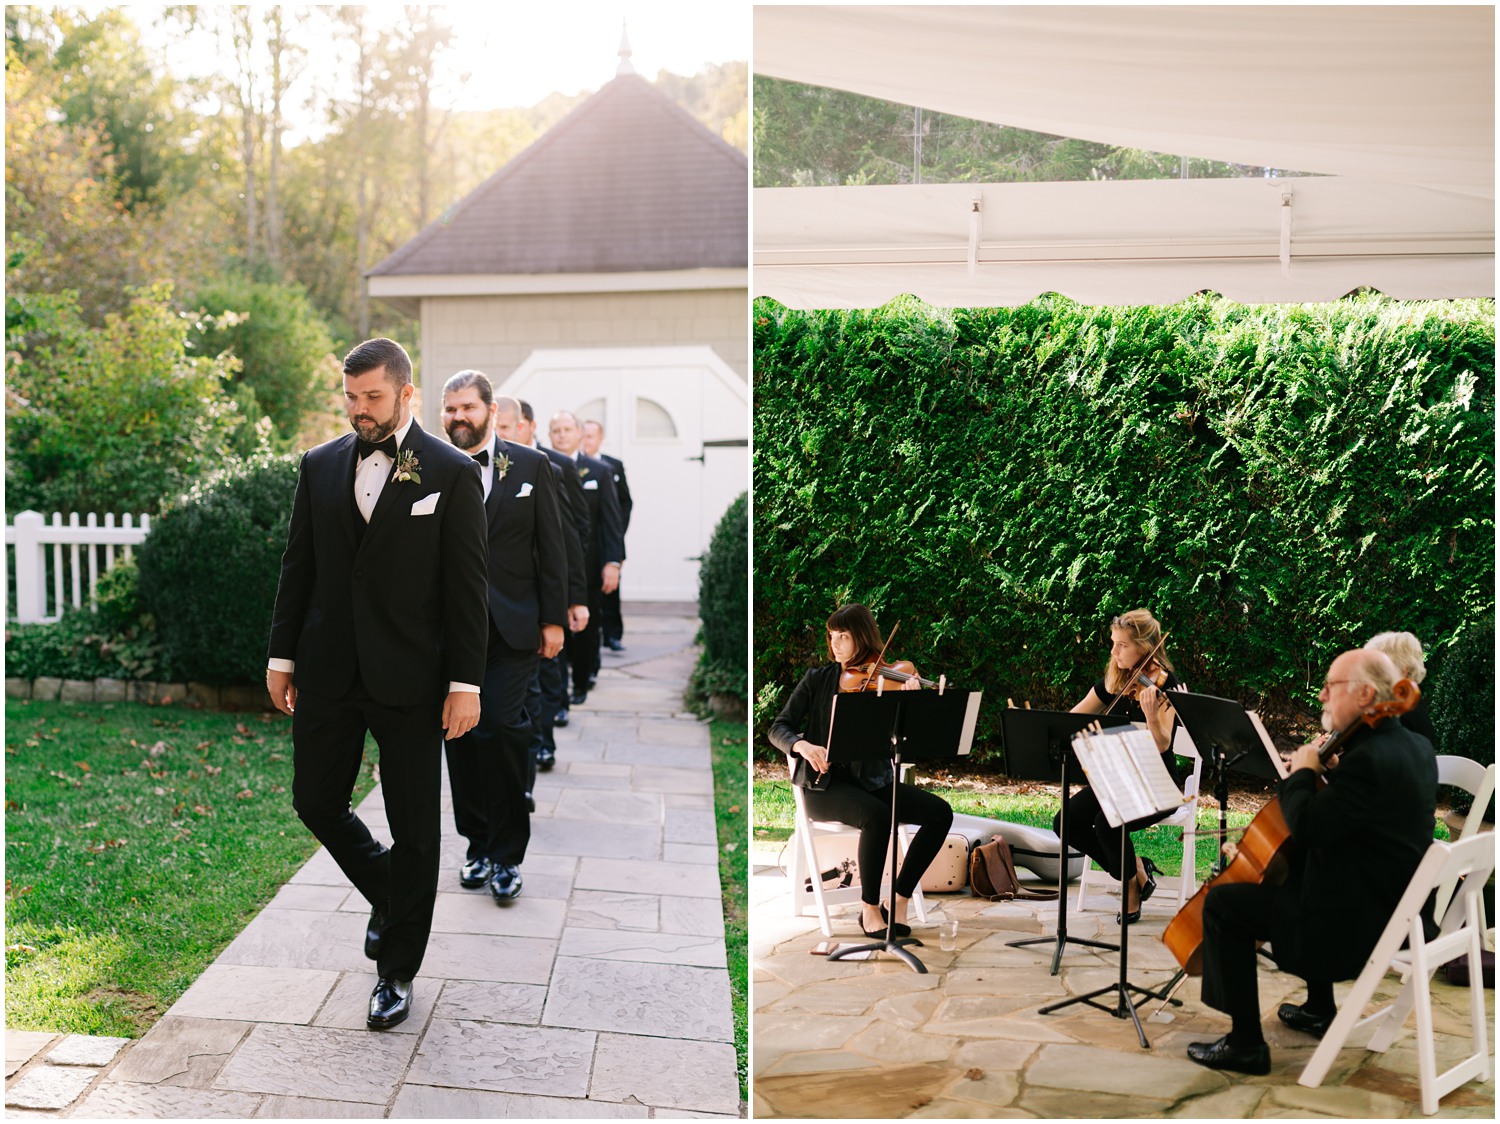 string quartet plays while groom and groomsmen enter ceremony